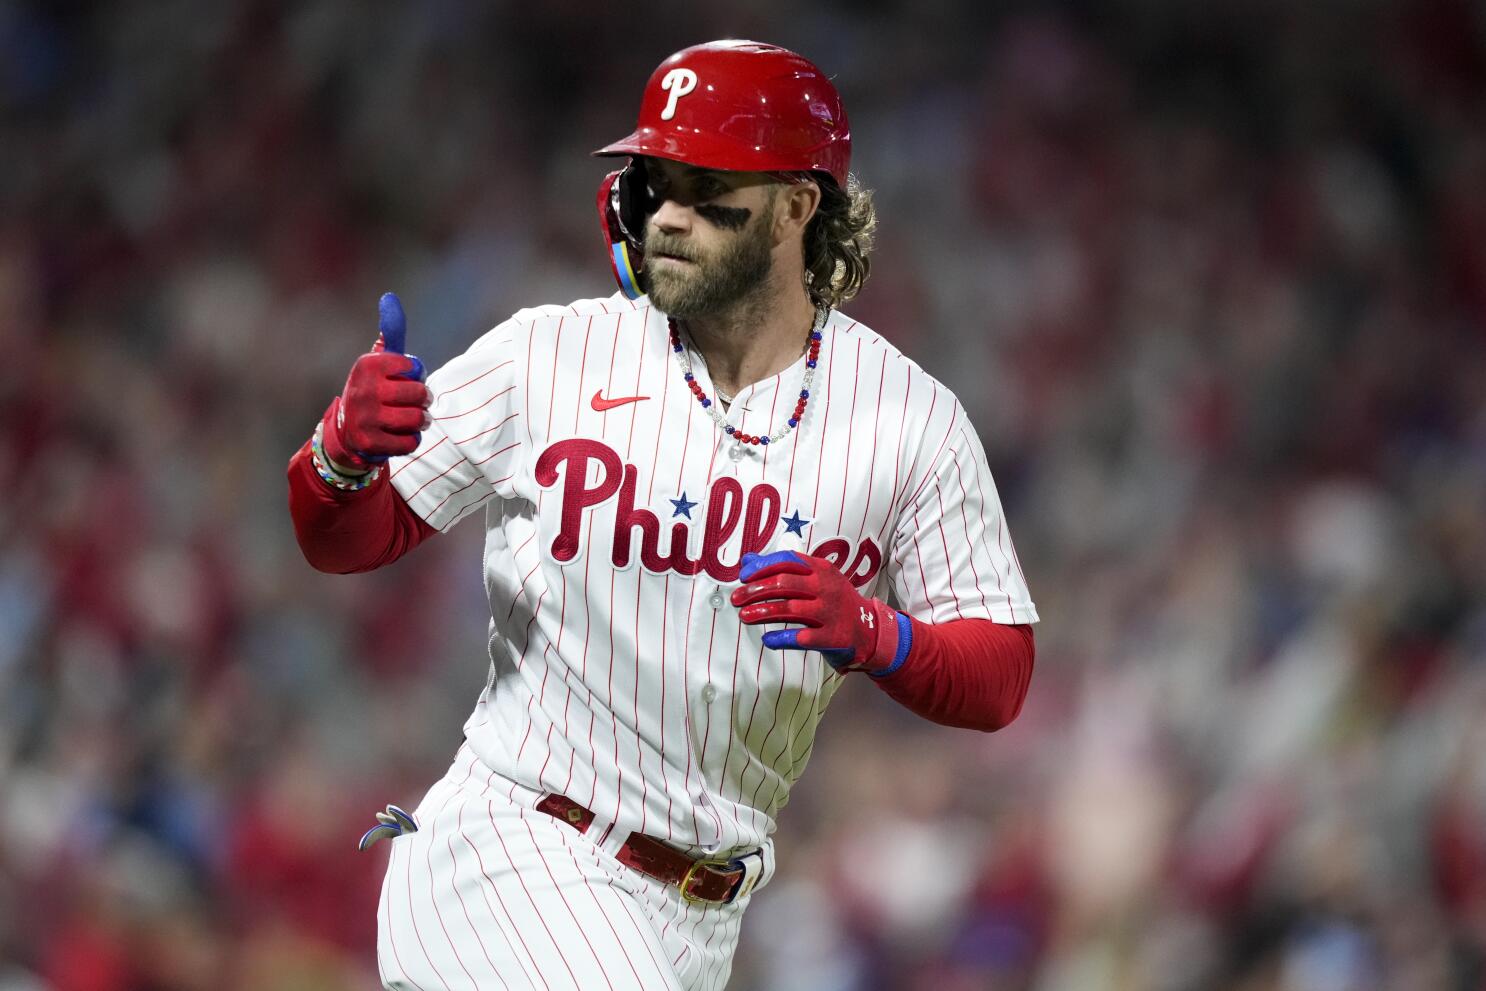 Bryce Harper's home run powers Phillies past Padres, into World Series